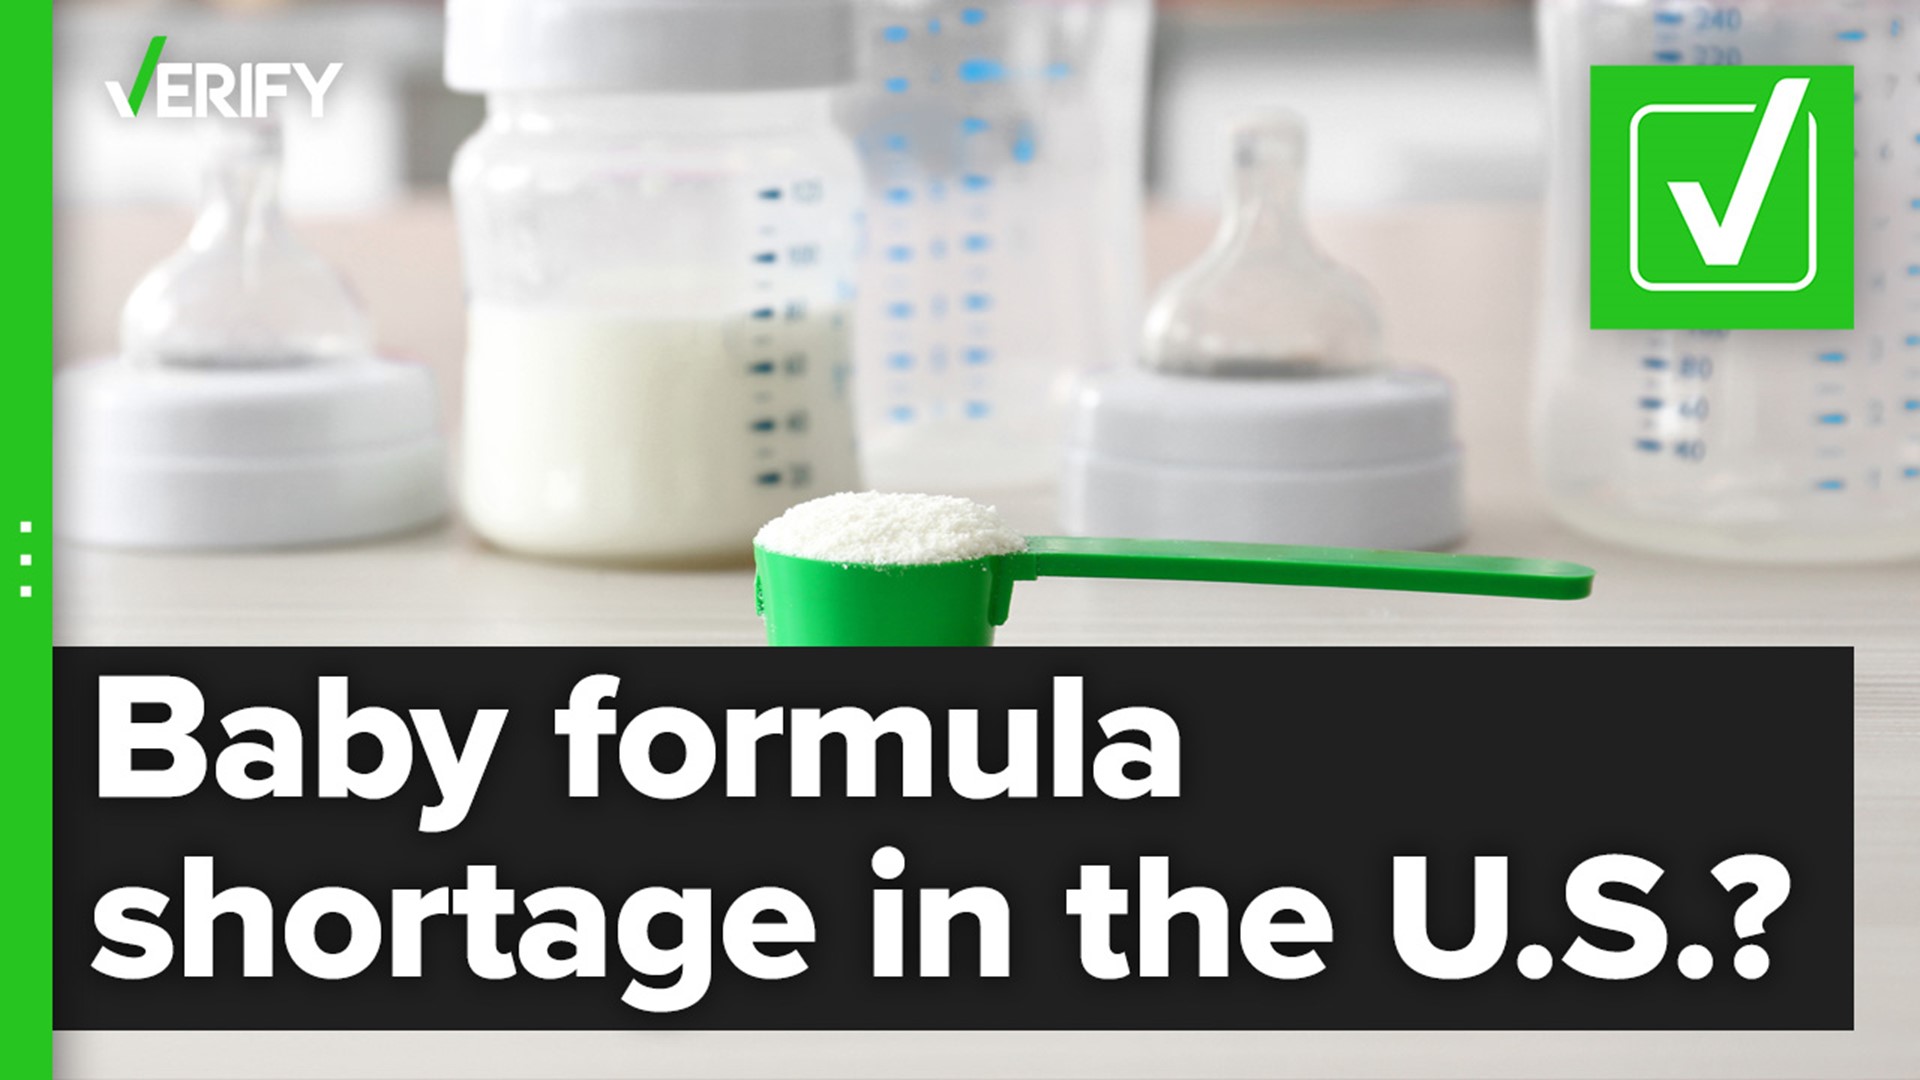 Some stores are limiting the amount of baby formula people can purchase to combat the effects of shortages caused by supply chain issues, recalls and other factors.